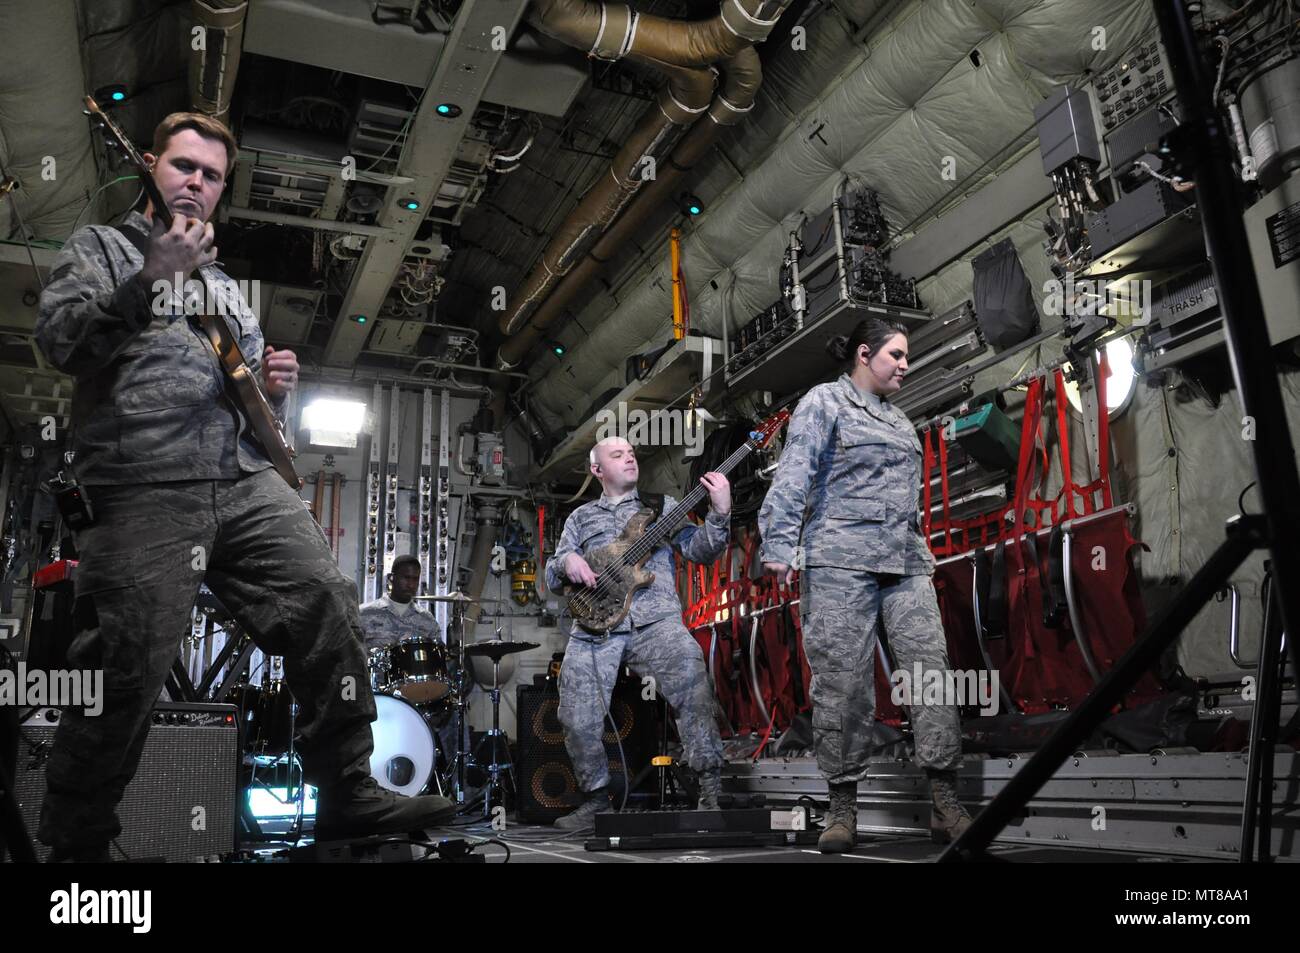 Members of the United States Air Force Academy Band’s, “Blue Steel,” perform inside an Air Force Reserve Command C-130 Hercules aircraft assigned to the 302nd Airlift Wing while recording scenes for their newest music video featuring the song “Fly Higher,” May 1, at Peterson Air Force Base, Colo. Pictured left to right are, Staff Sgts. Joe Gacioch, guitarist, Quincy Brown, drummer, Colin Trusedell, bassist, and Airman 1st Class Danielle Diaz, vocalist. The music video can be found here: https://www.youtube.com/watch?v=aSq37dNrzM4. (Air Force photo/Staff Sgt. Frank Casciotta) Stock Photo